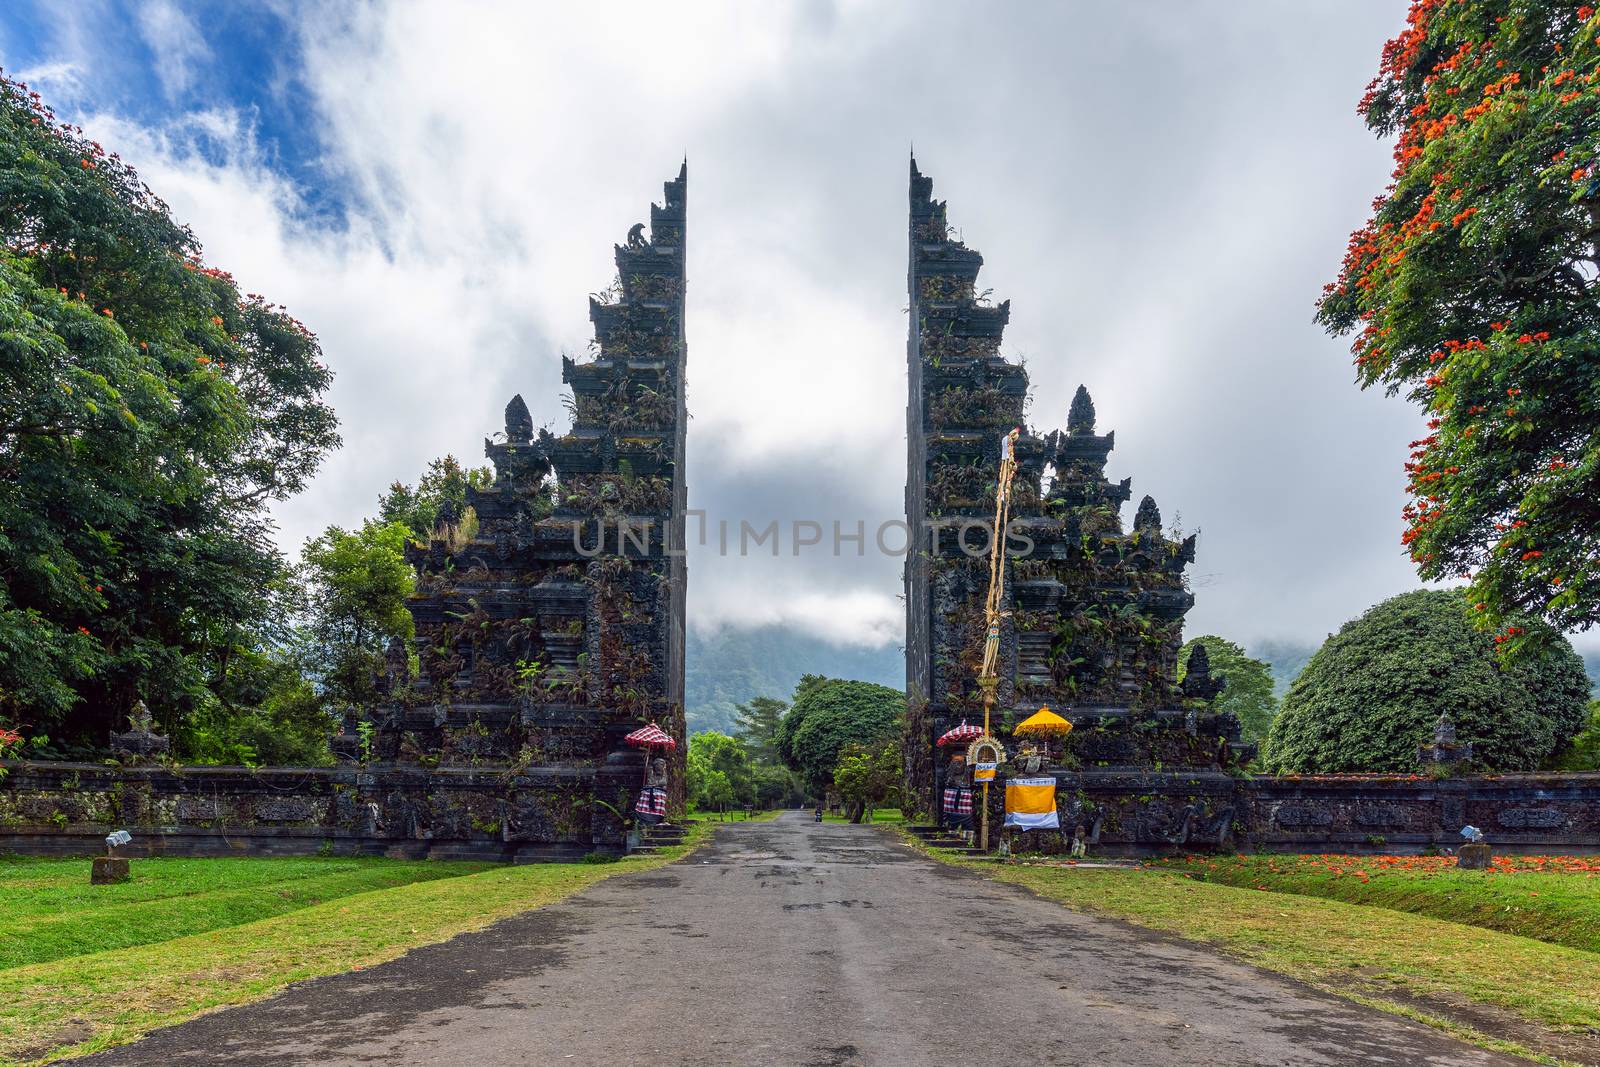 Big entrance gate in Bali, Indonesia. by gutarphotoghaphy